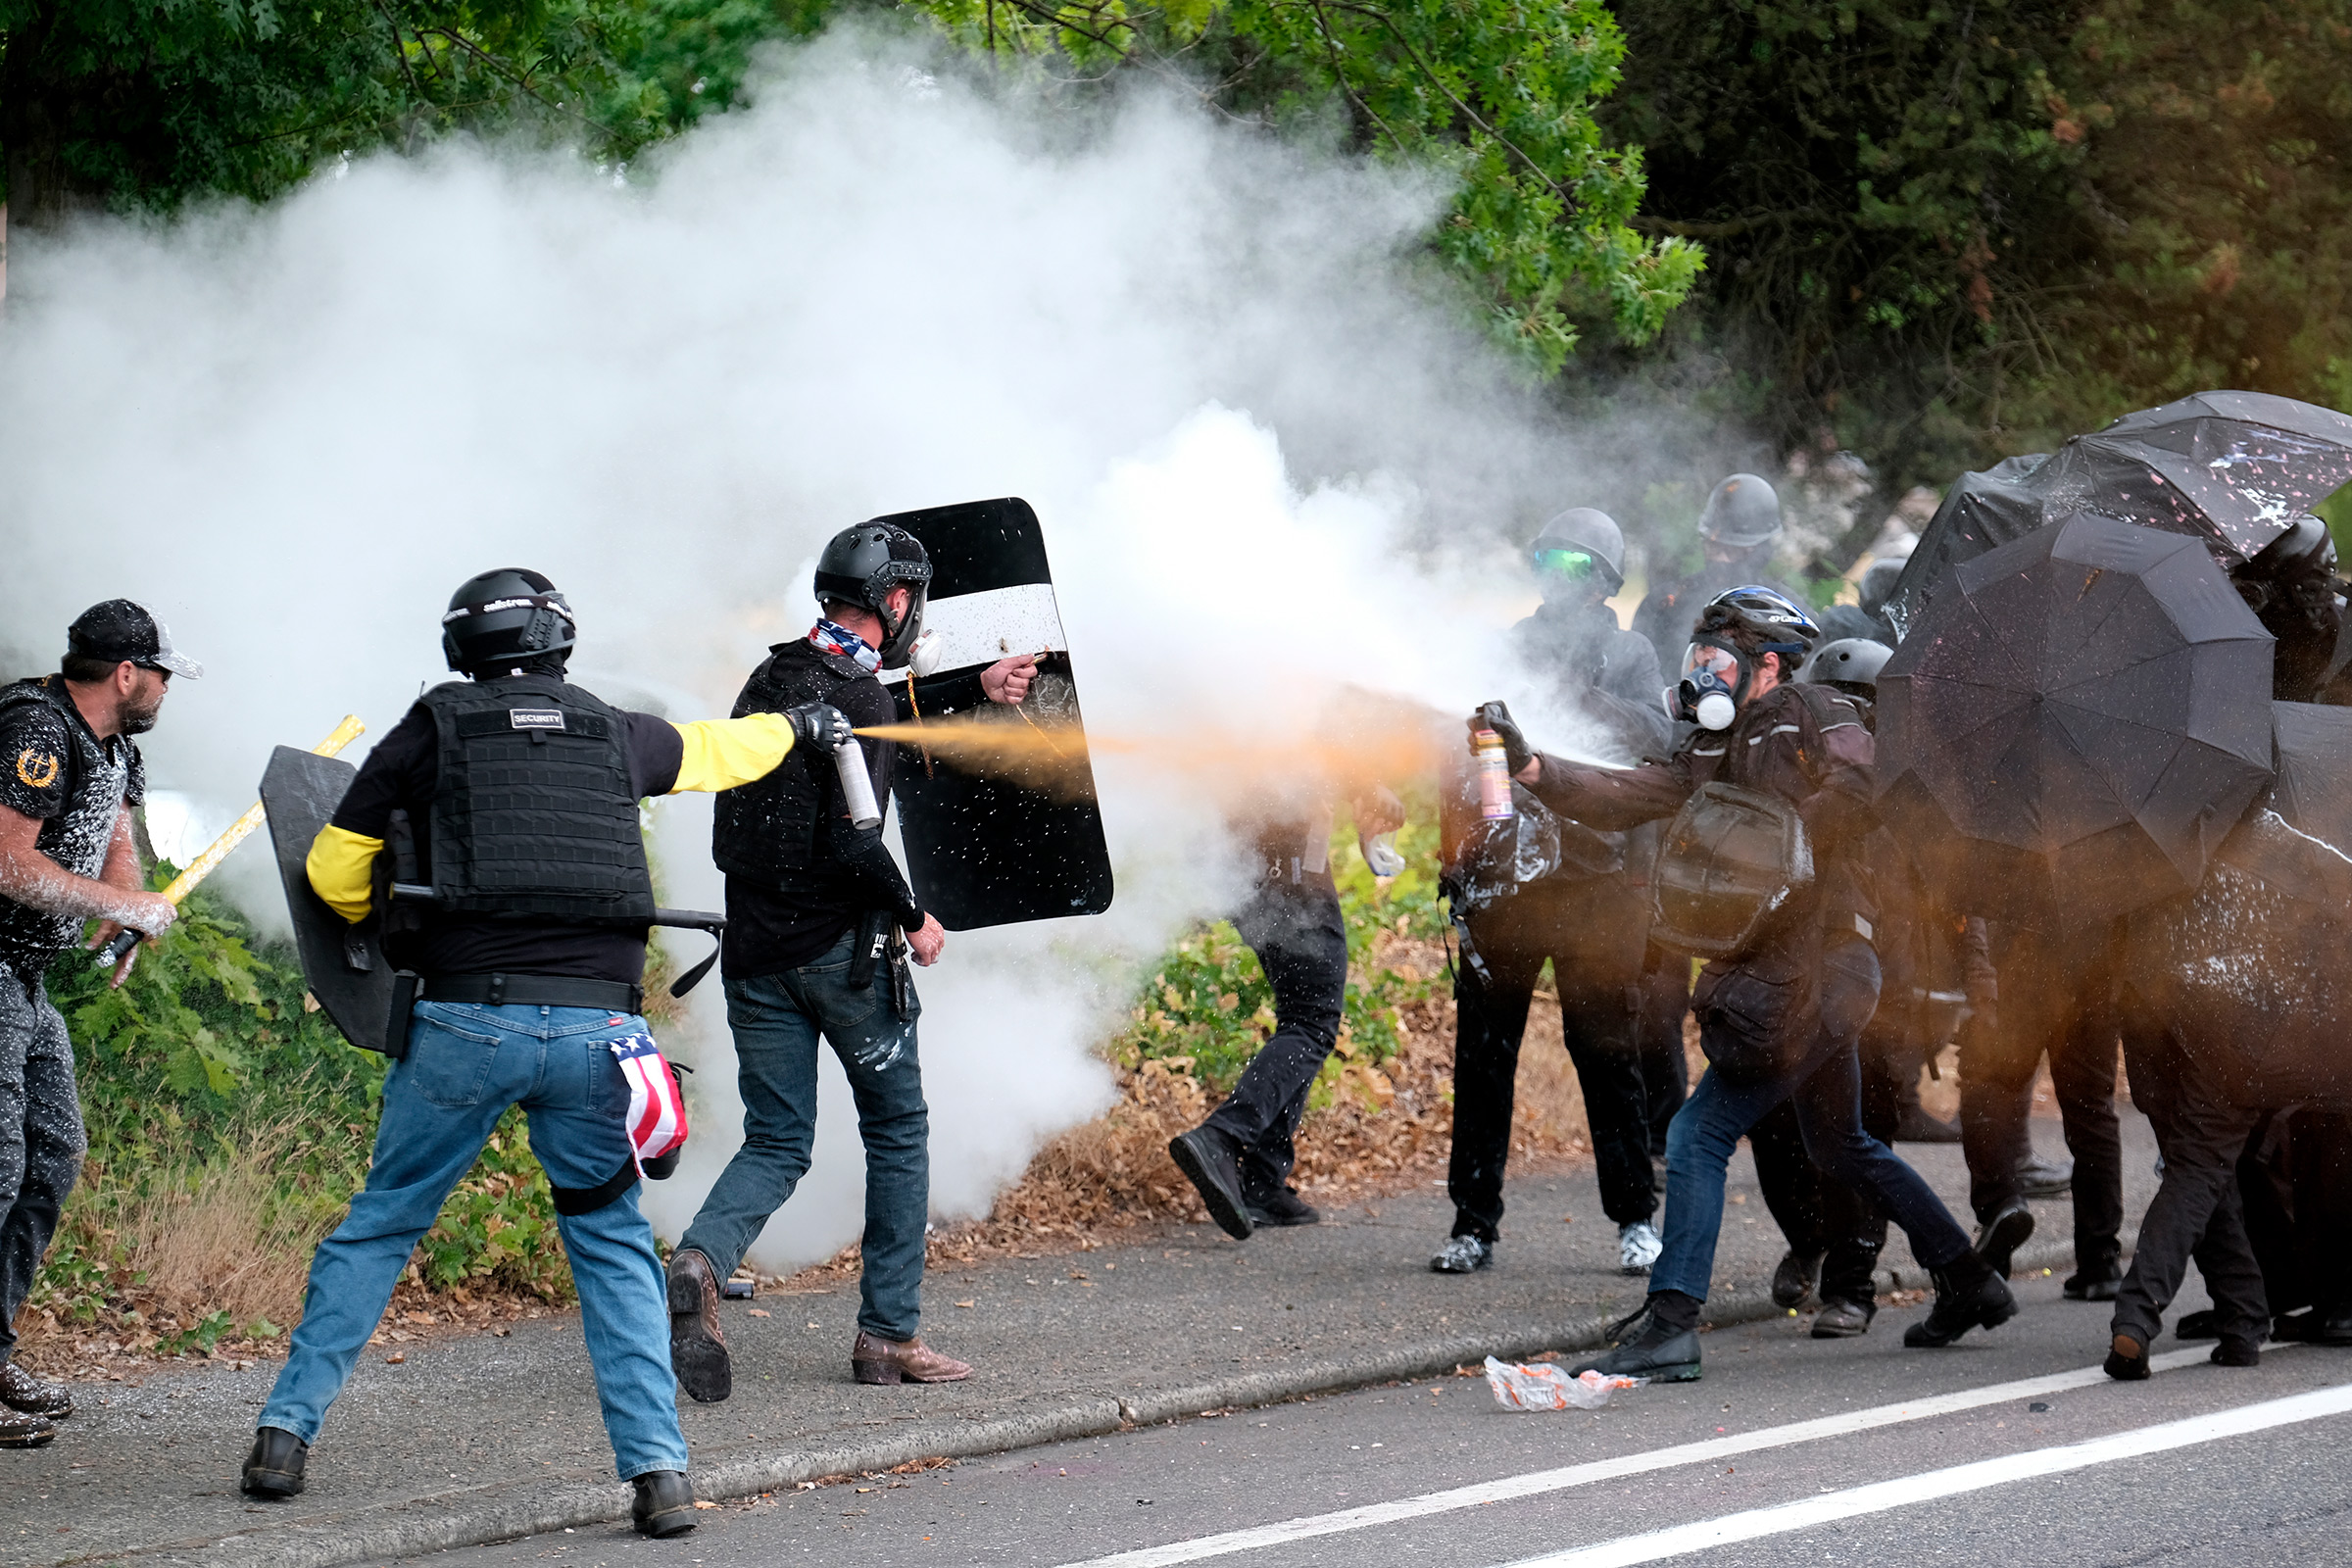 Members of Proud Boys and anti-fascist protesters spray mace at each other during clashes in Portland, Ore., on Aug. 22, 2021. (Alex Milan Tracy—AP)